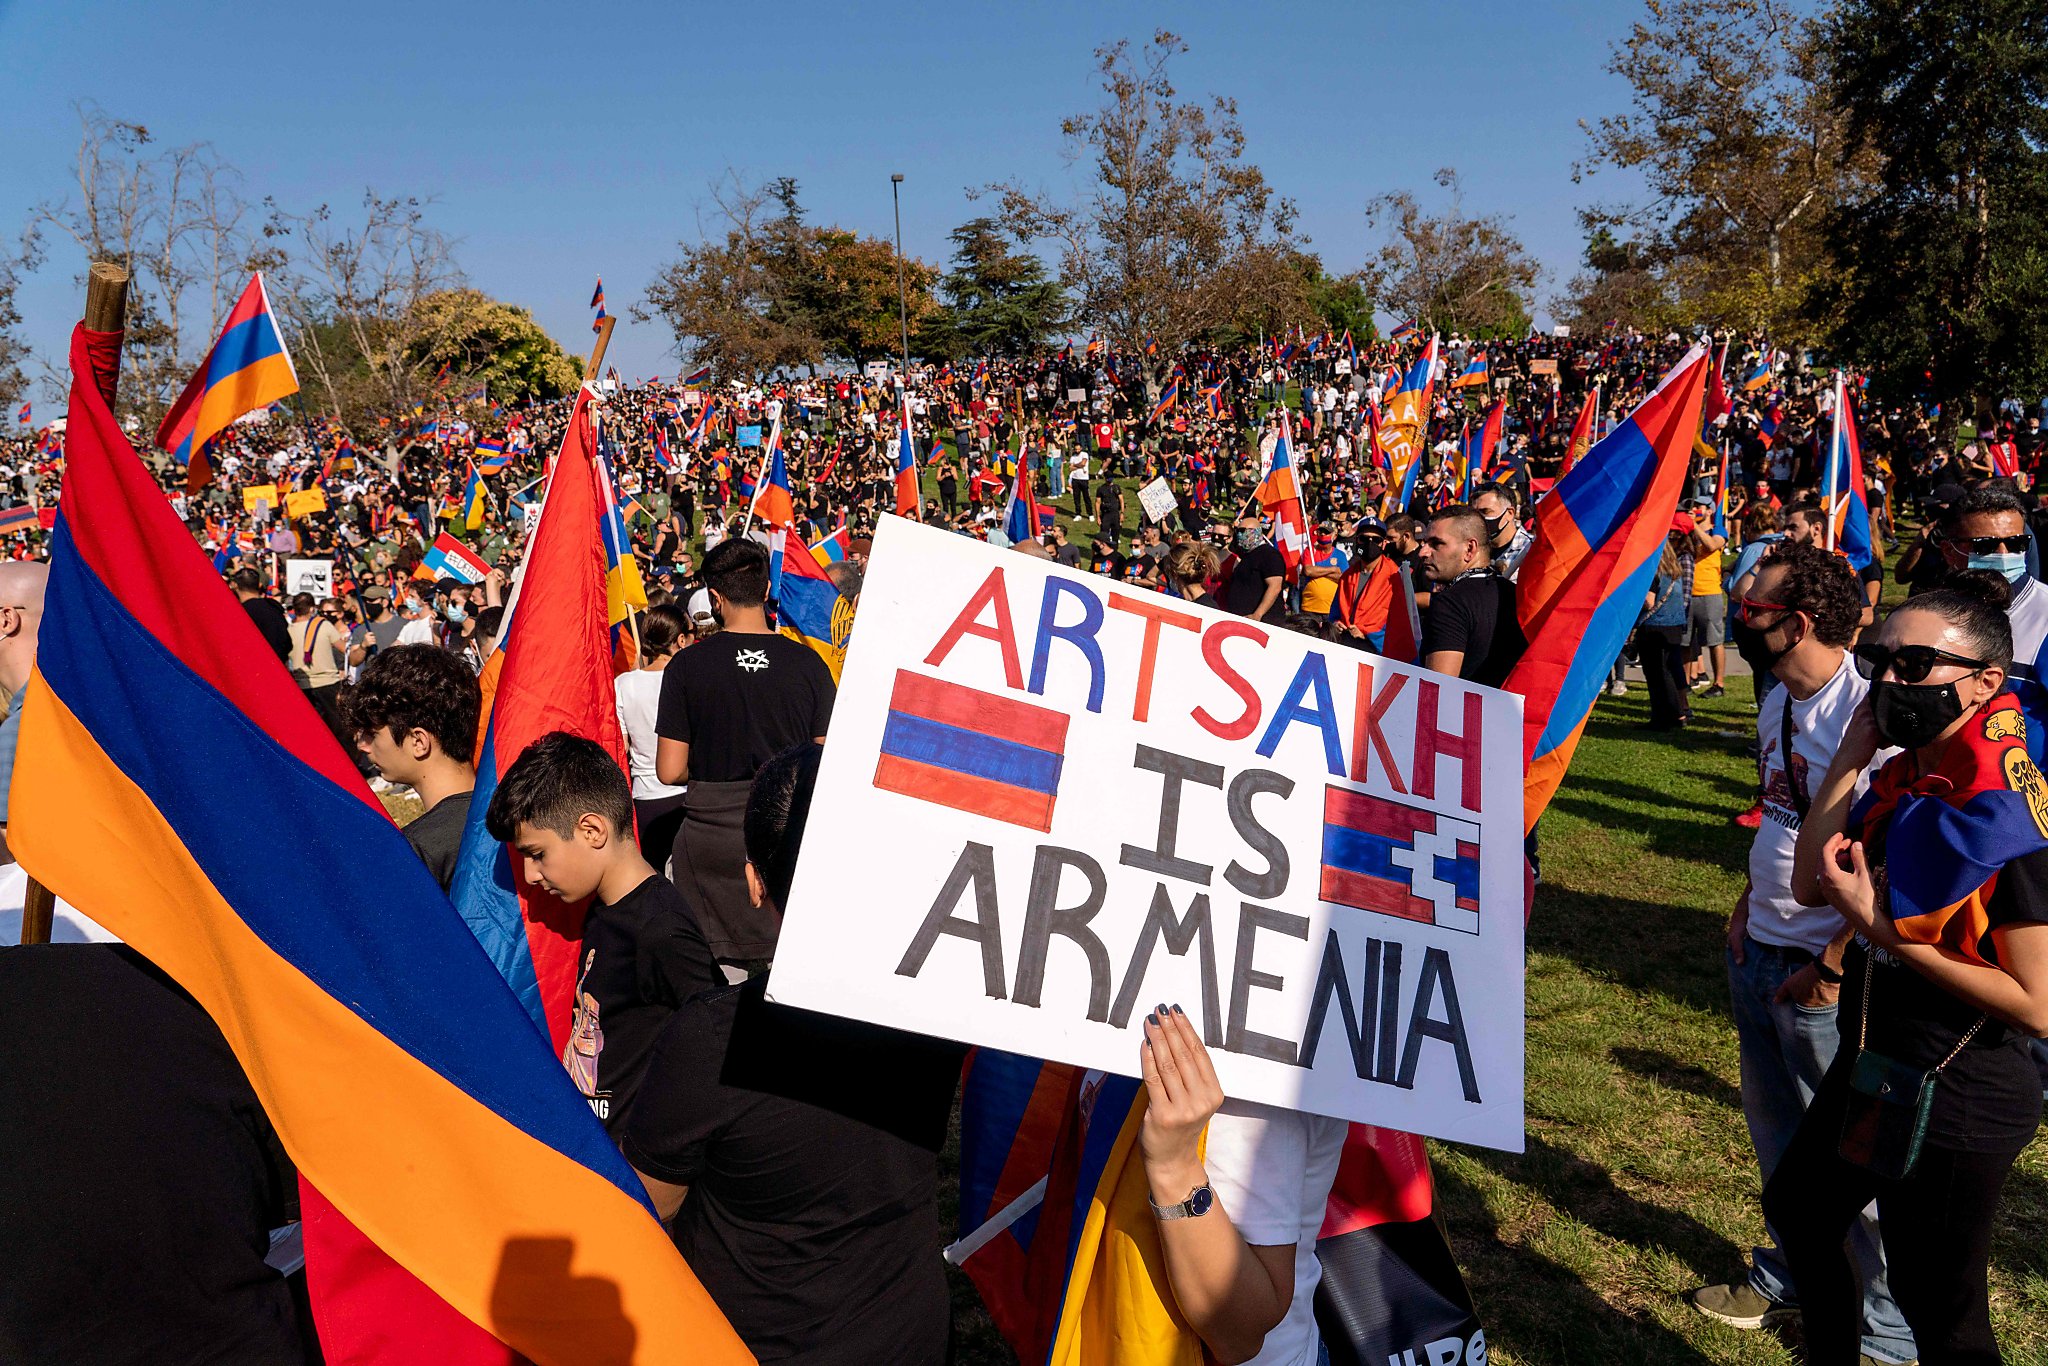 Armenians of Artsakh need our support in their fight for survival and